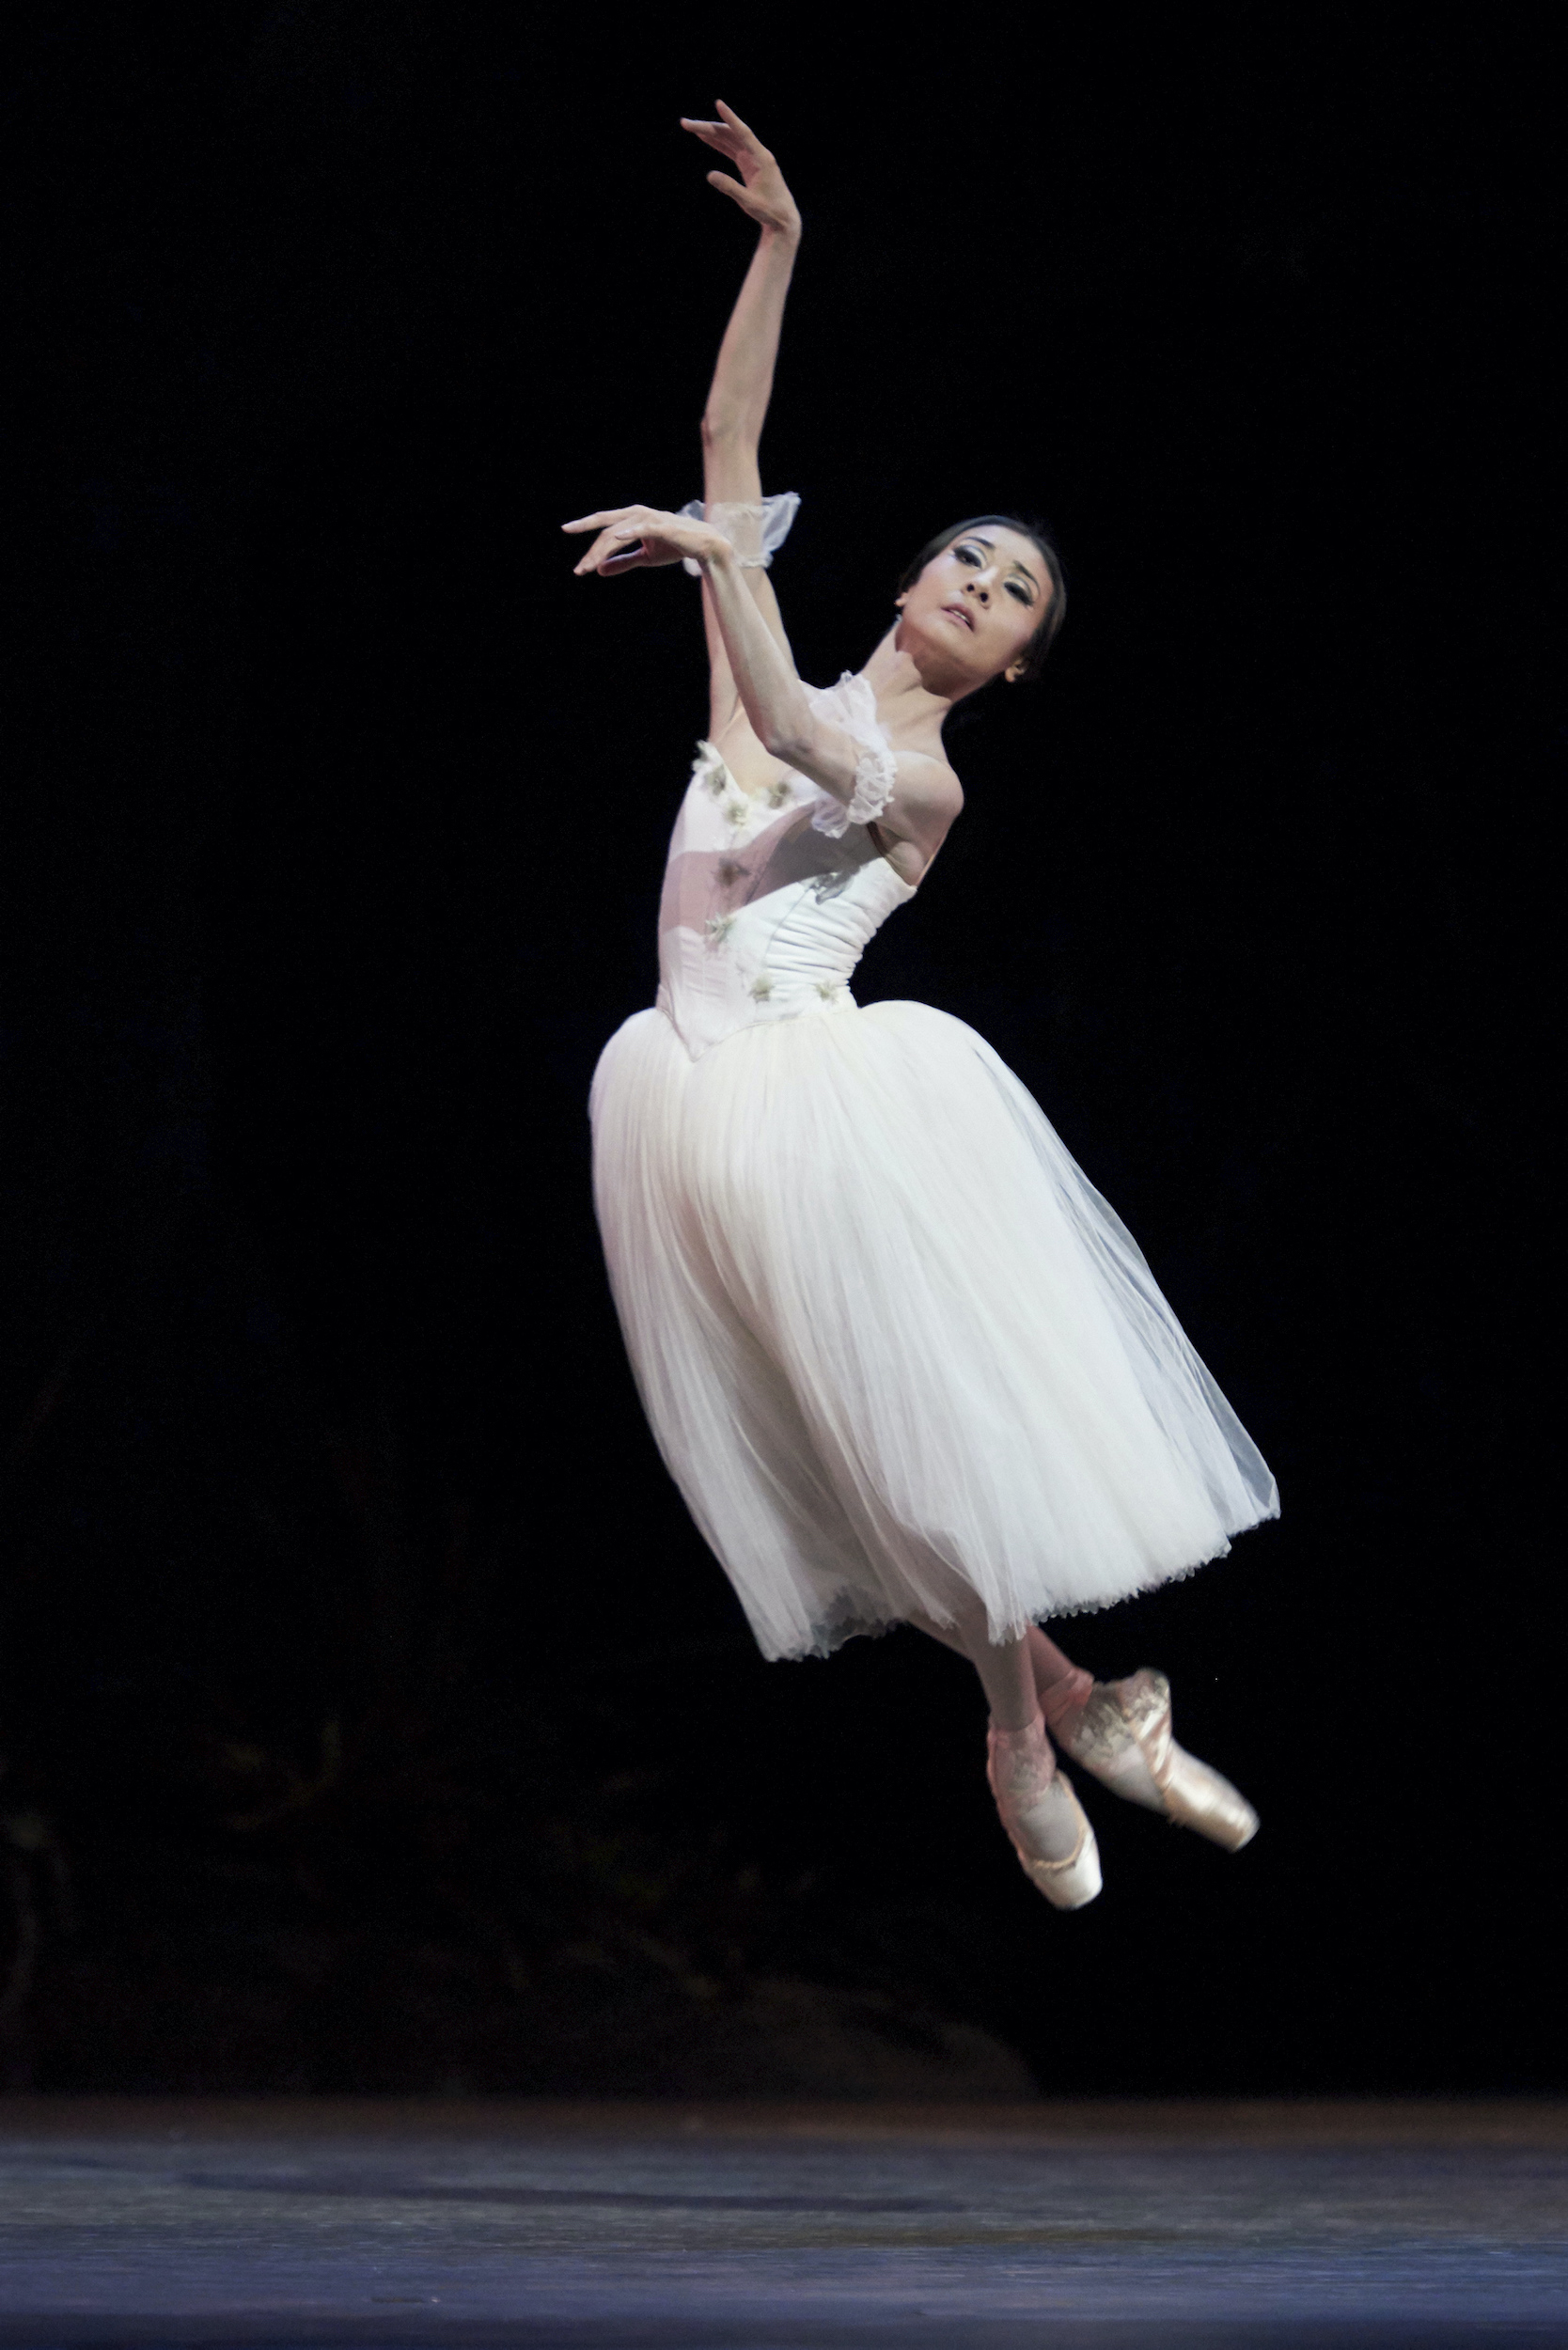 Yuan Yuan Tan jumps up with her crossed feet slightly tucked up underneath her during a performance of Giselle. She lifts her arms to fourth arabesque and looks out over her left hand. Tan wears a long white Romantic tutu, pink tights, and pointe shoes.